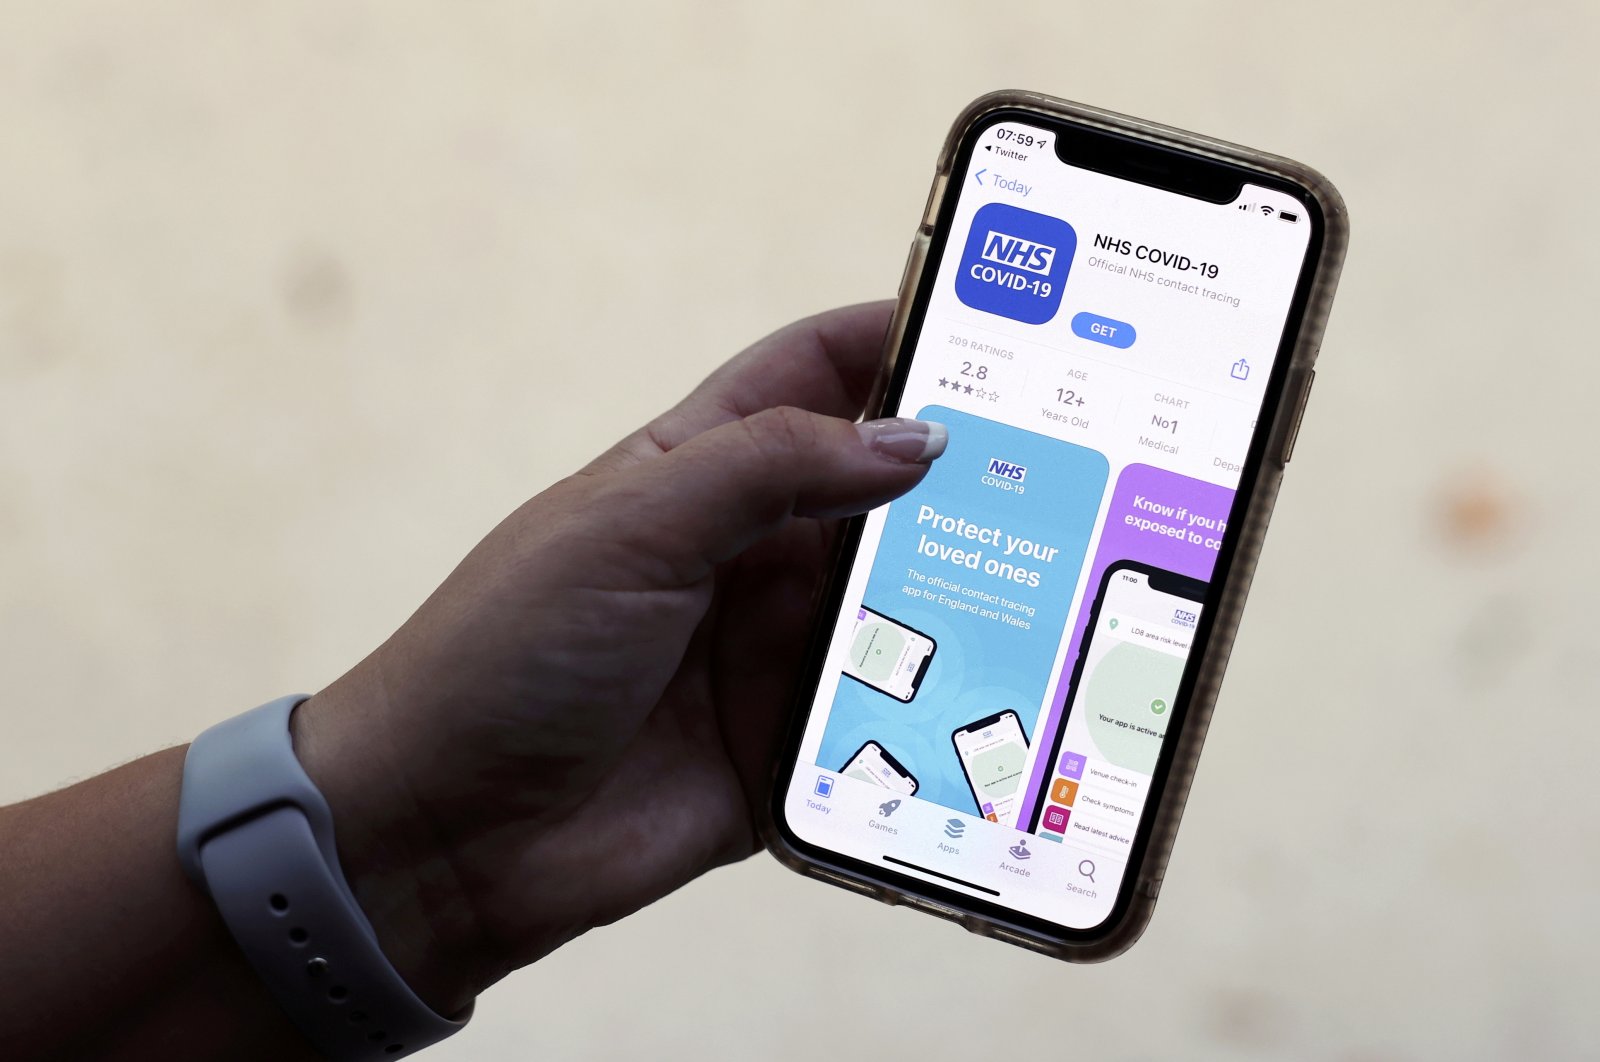 The coronavirus contact tracing smartphone app of Britain's National Health Service (NHS) is displayed on an iPhone in this illustration photograph taken in Keele, Britain, Sept. 24, 2020. (Reuters Photo)